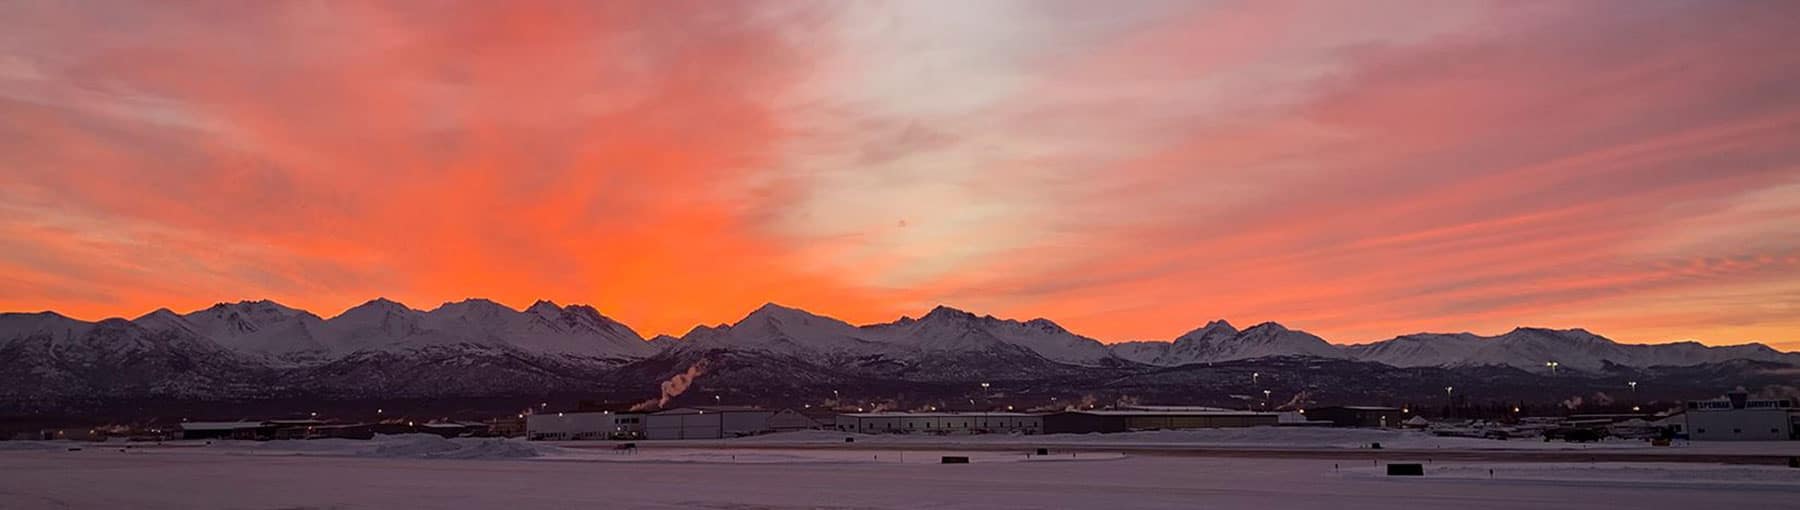 View of the airport with mountains and vibrant sunset in the background.